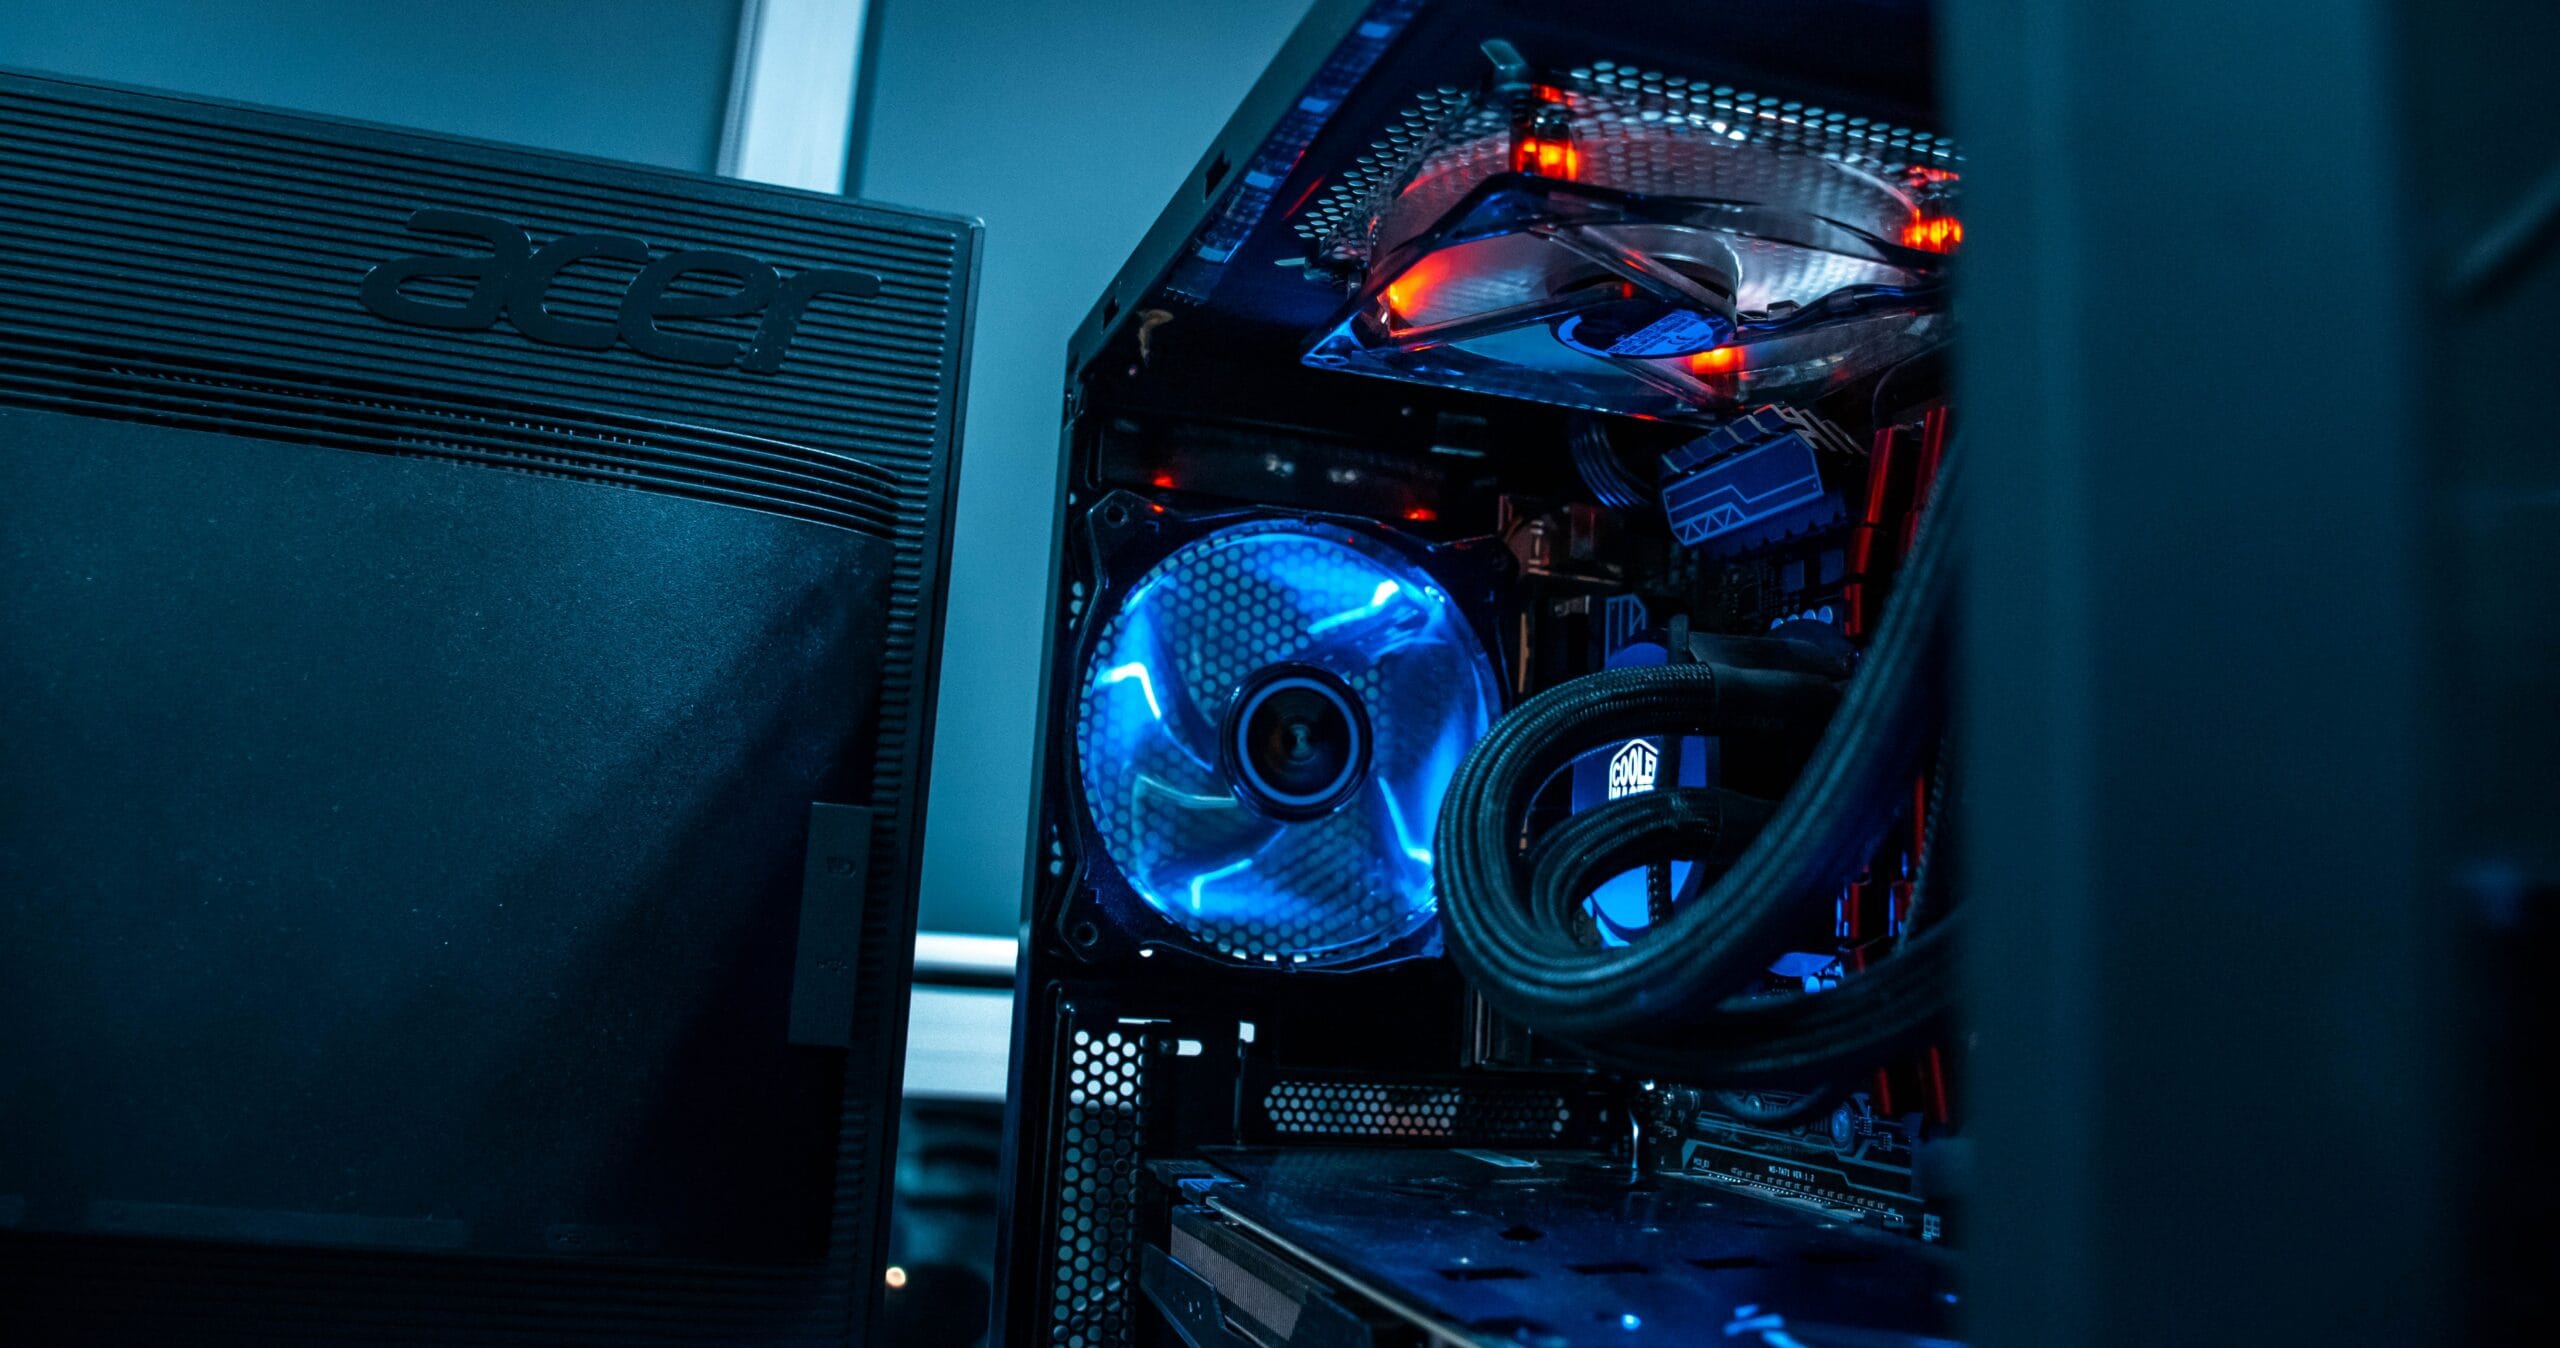 An Ideal Gaming PC: What Should You Look For?